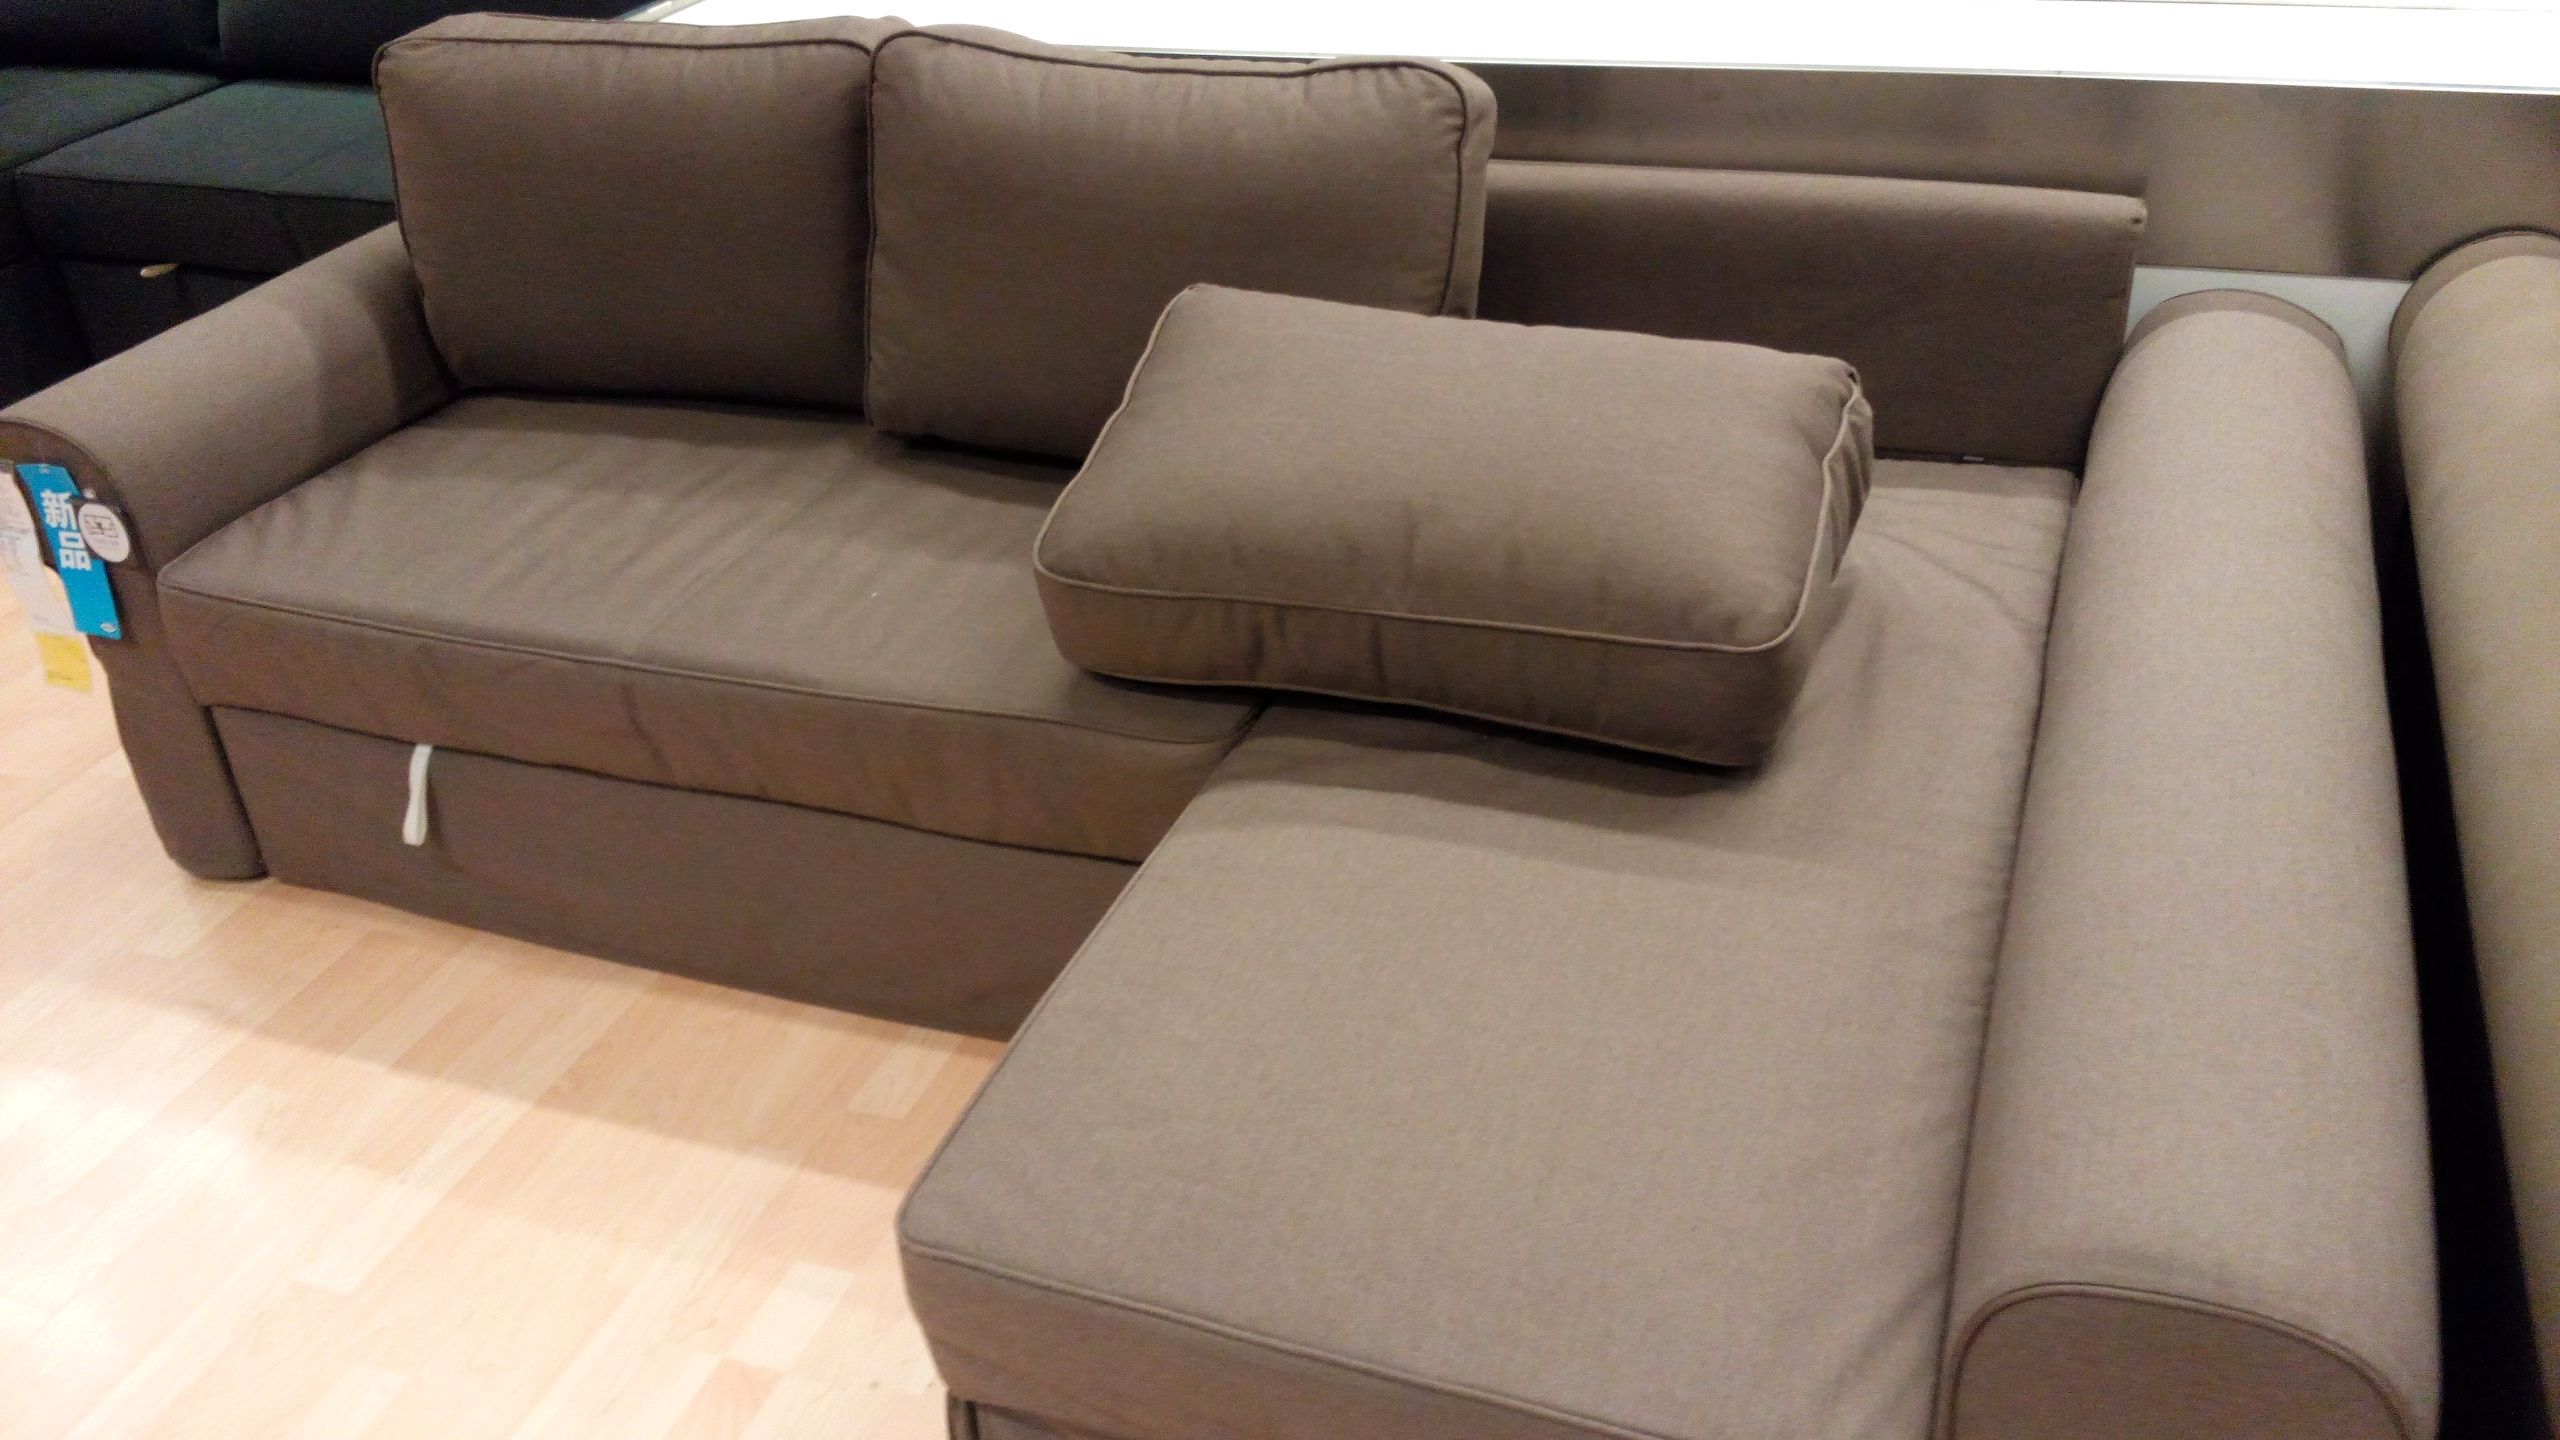 Lovely Manstad Sectional Sofa Bed Storage From Ikea 94 In Big Sofas Throughout Manstad Sofas (Photo 6135 of 7825)